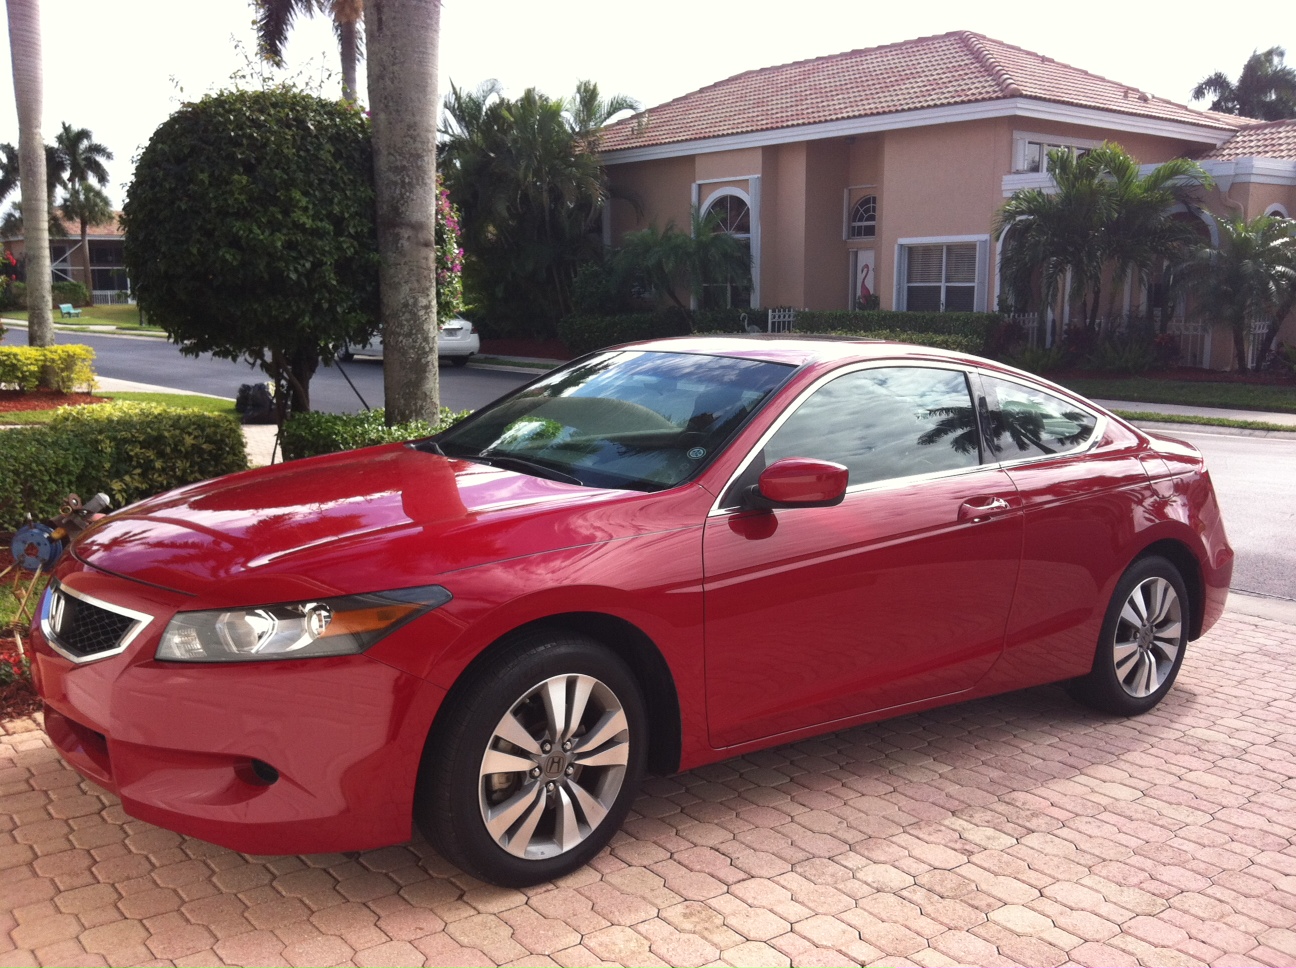 2009 White honda accord coupe for sale #5